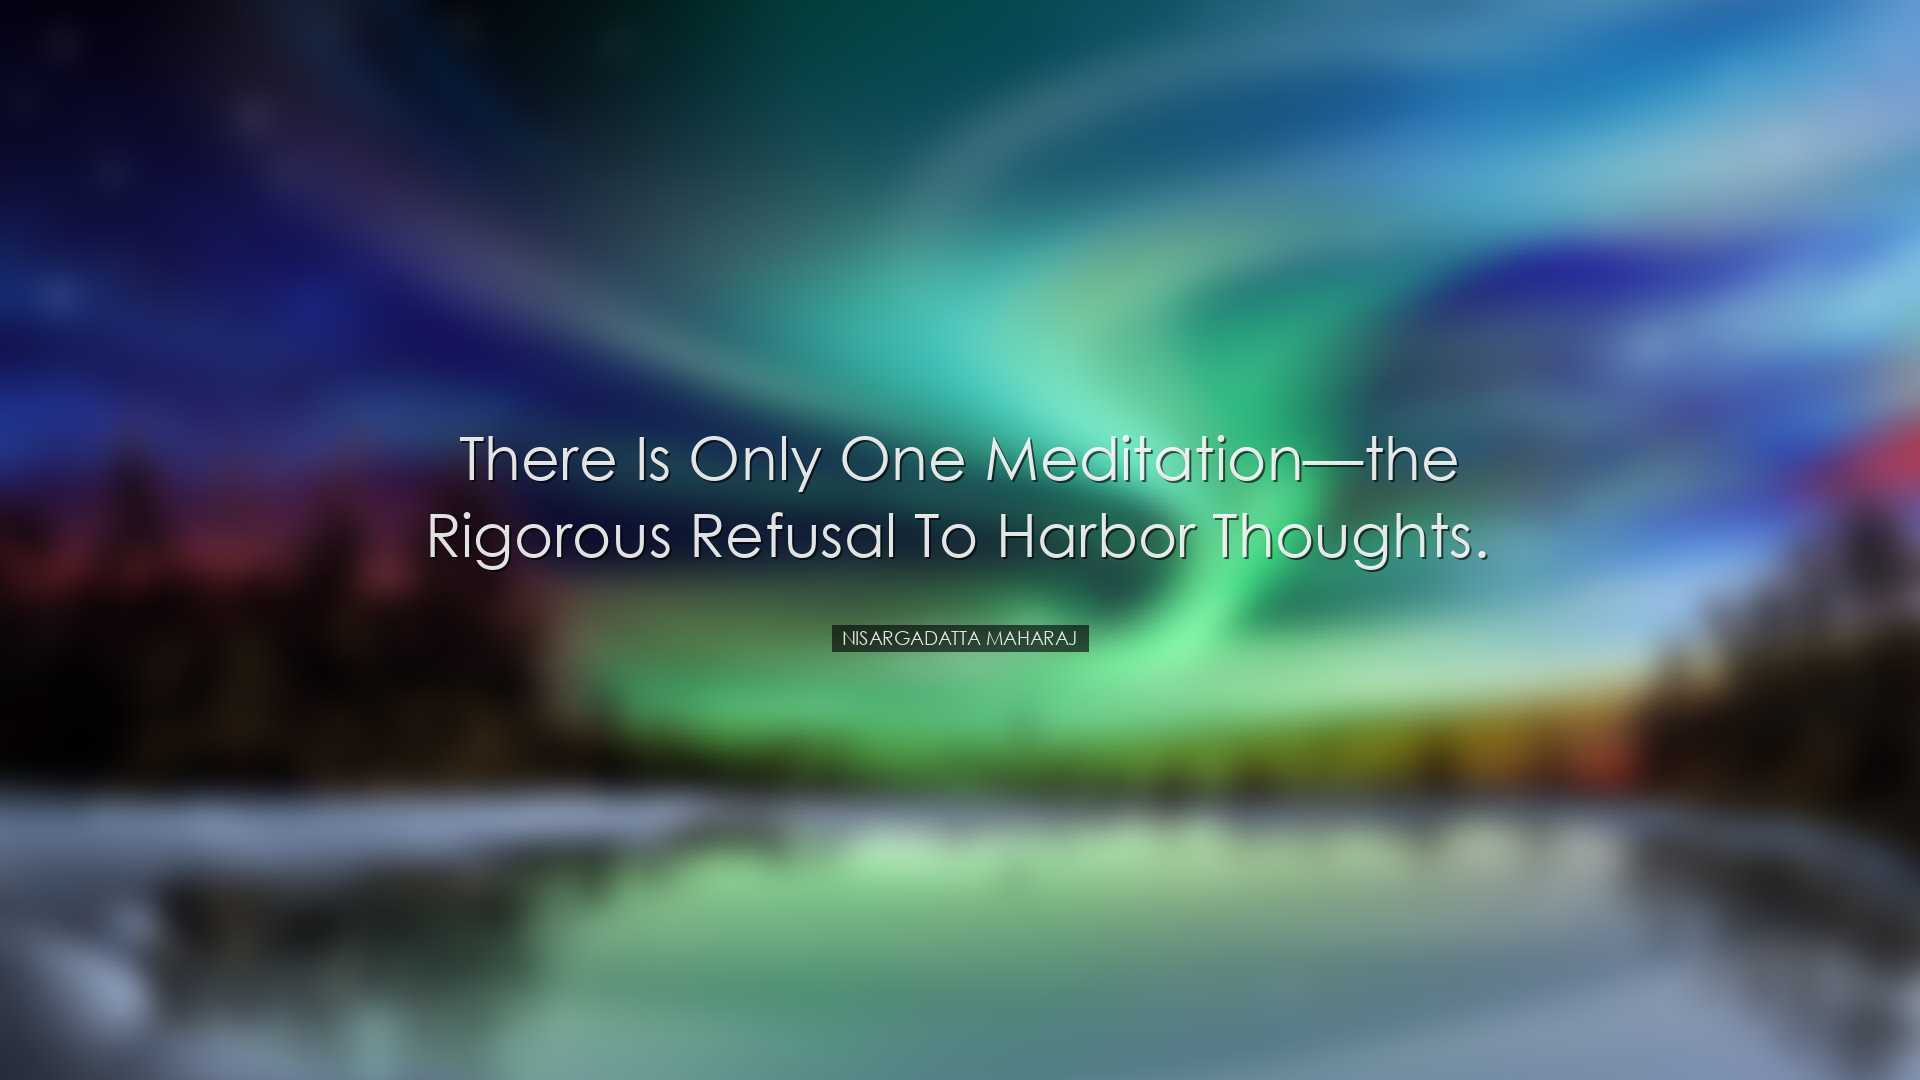 There is only one meditationâ€”the rigorous refusal to harbor